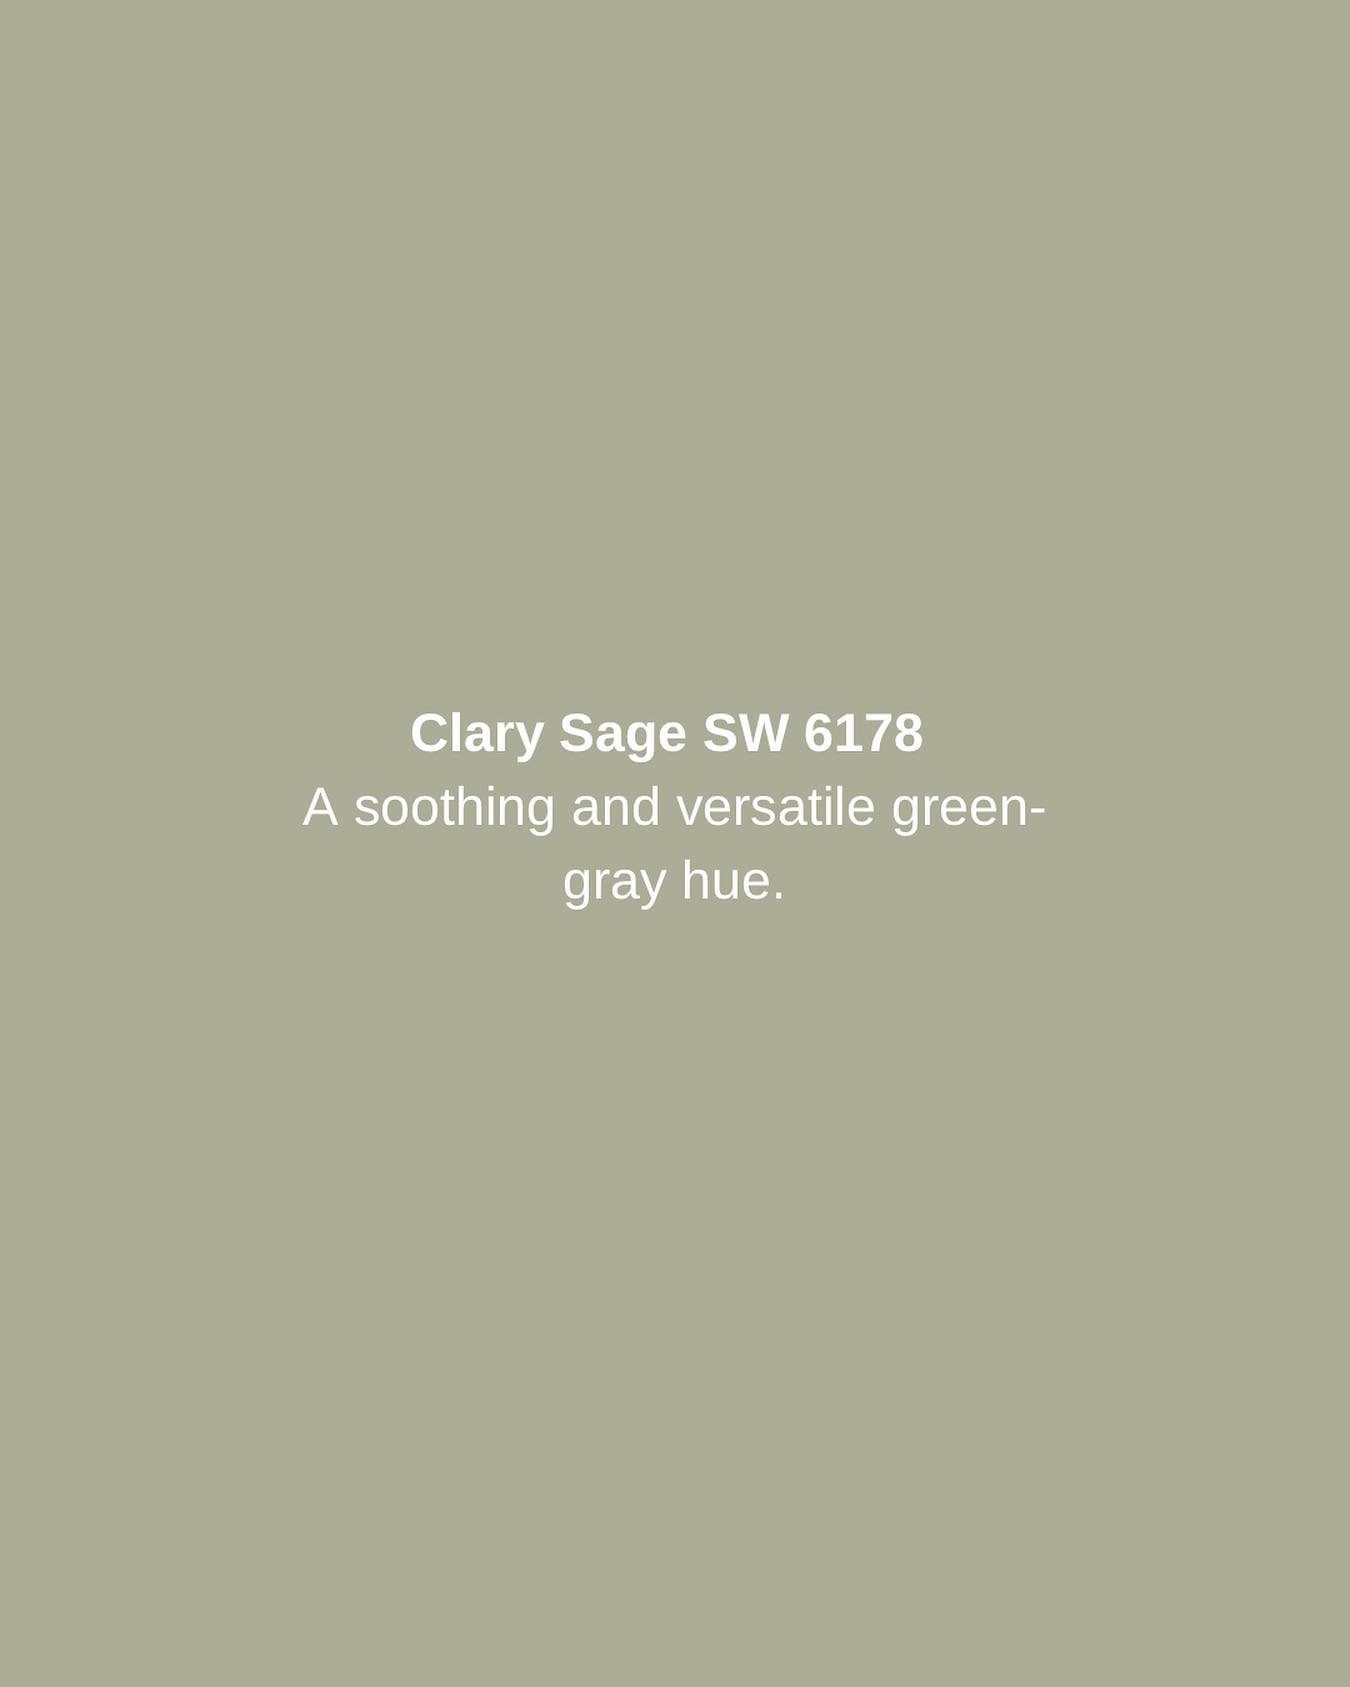 Clary Sage SW 6178 is a soothing and versatile green-gray hue that pairs beautifully with Pure White SW 7005 to create a clean and refreshing aesthetic, perfect for achieving that modern and airy vibe.

*Please note that colours may appear differentl